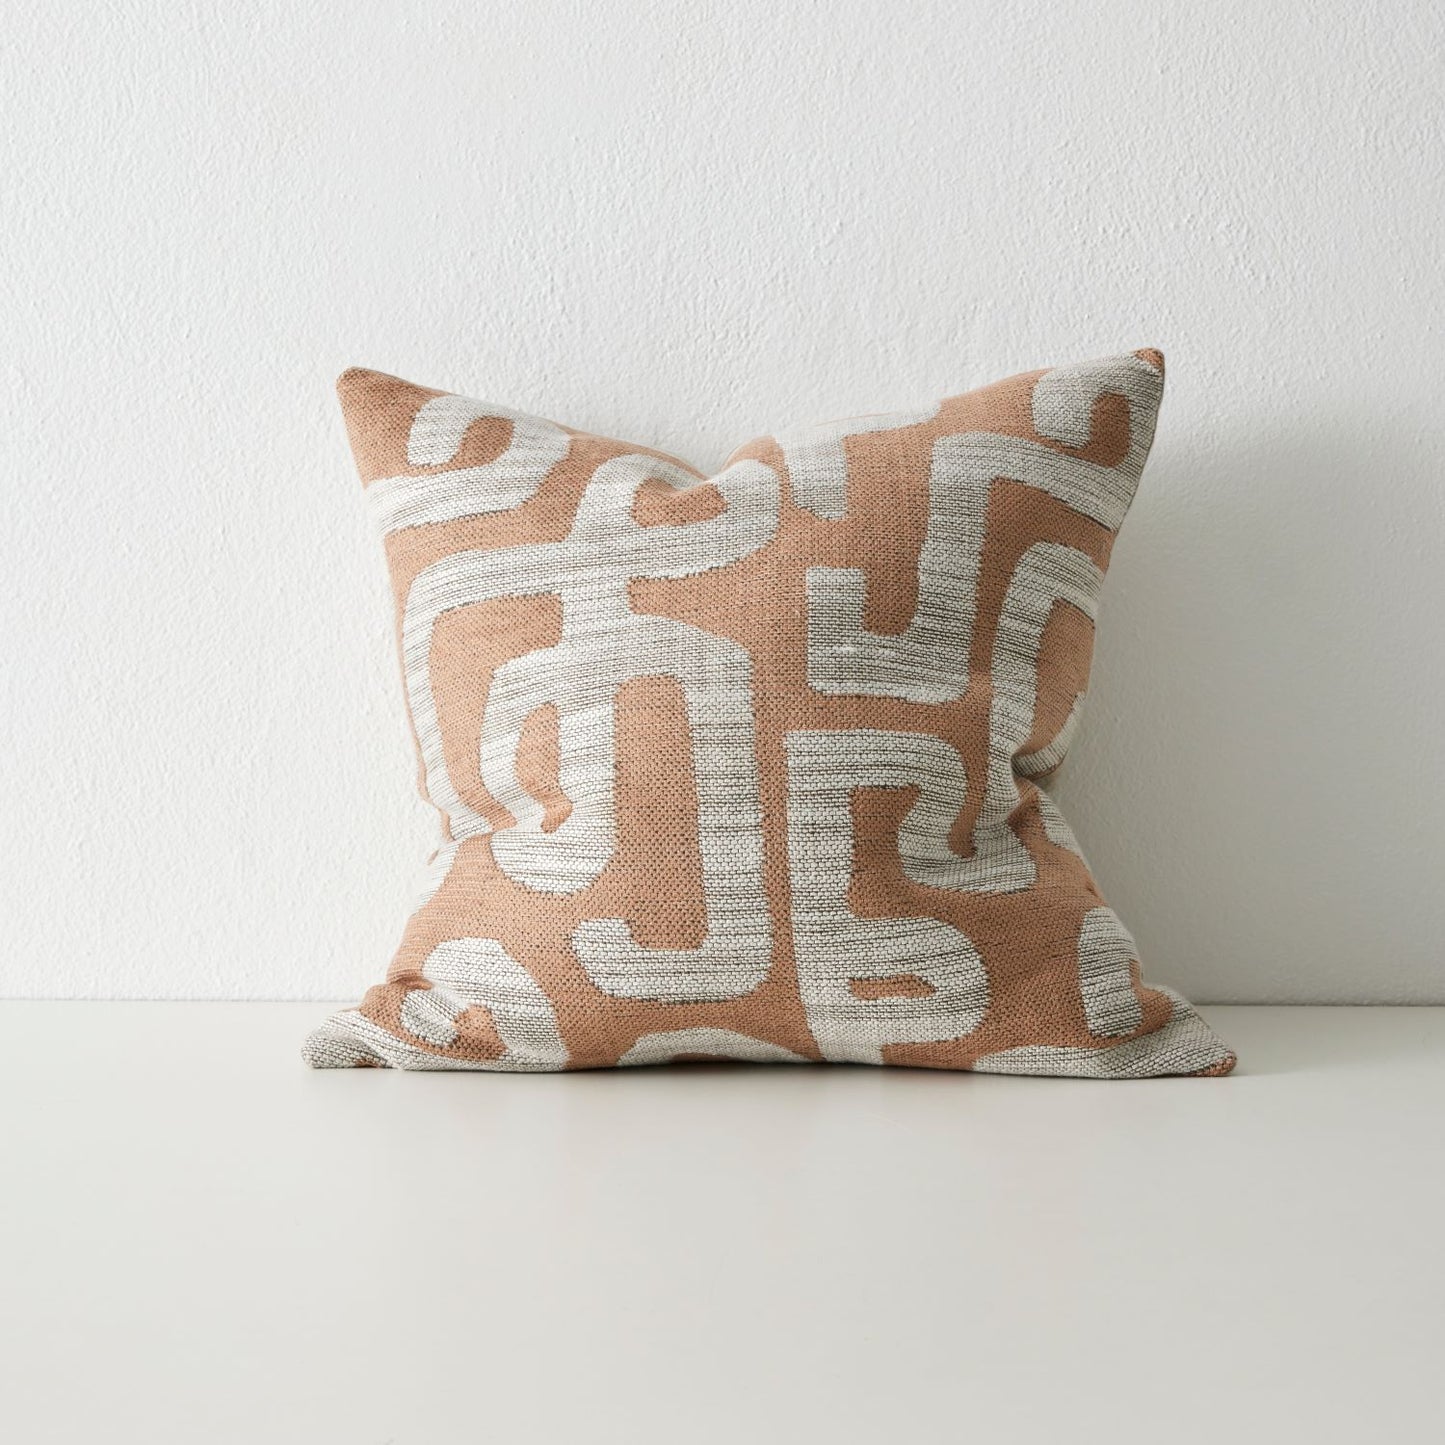 Serene cushion with geometric ikat pattern in coral and grey